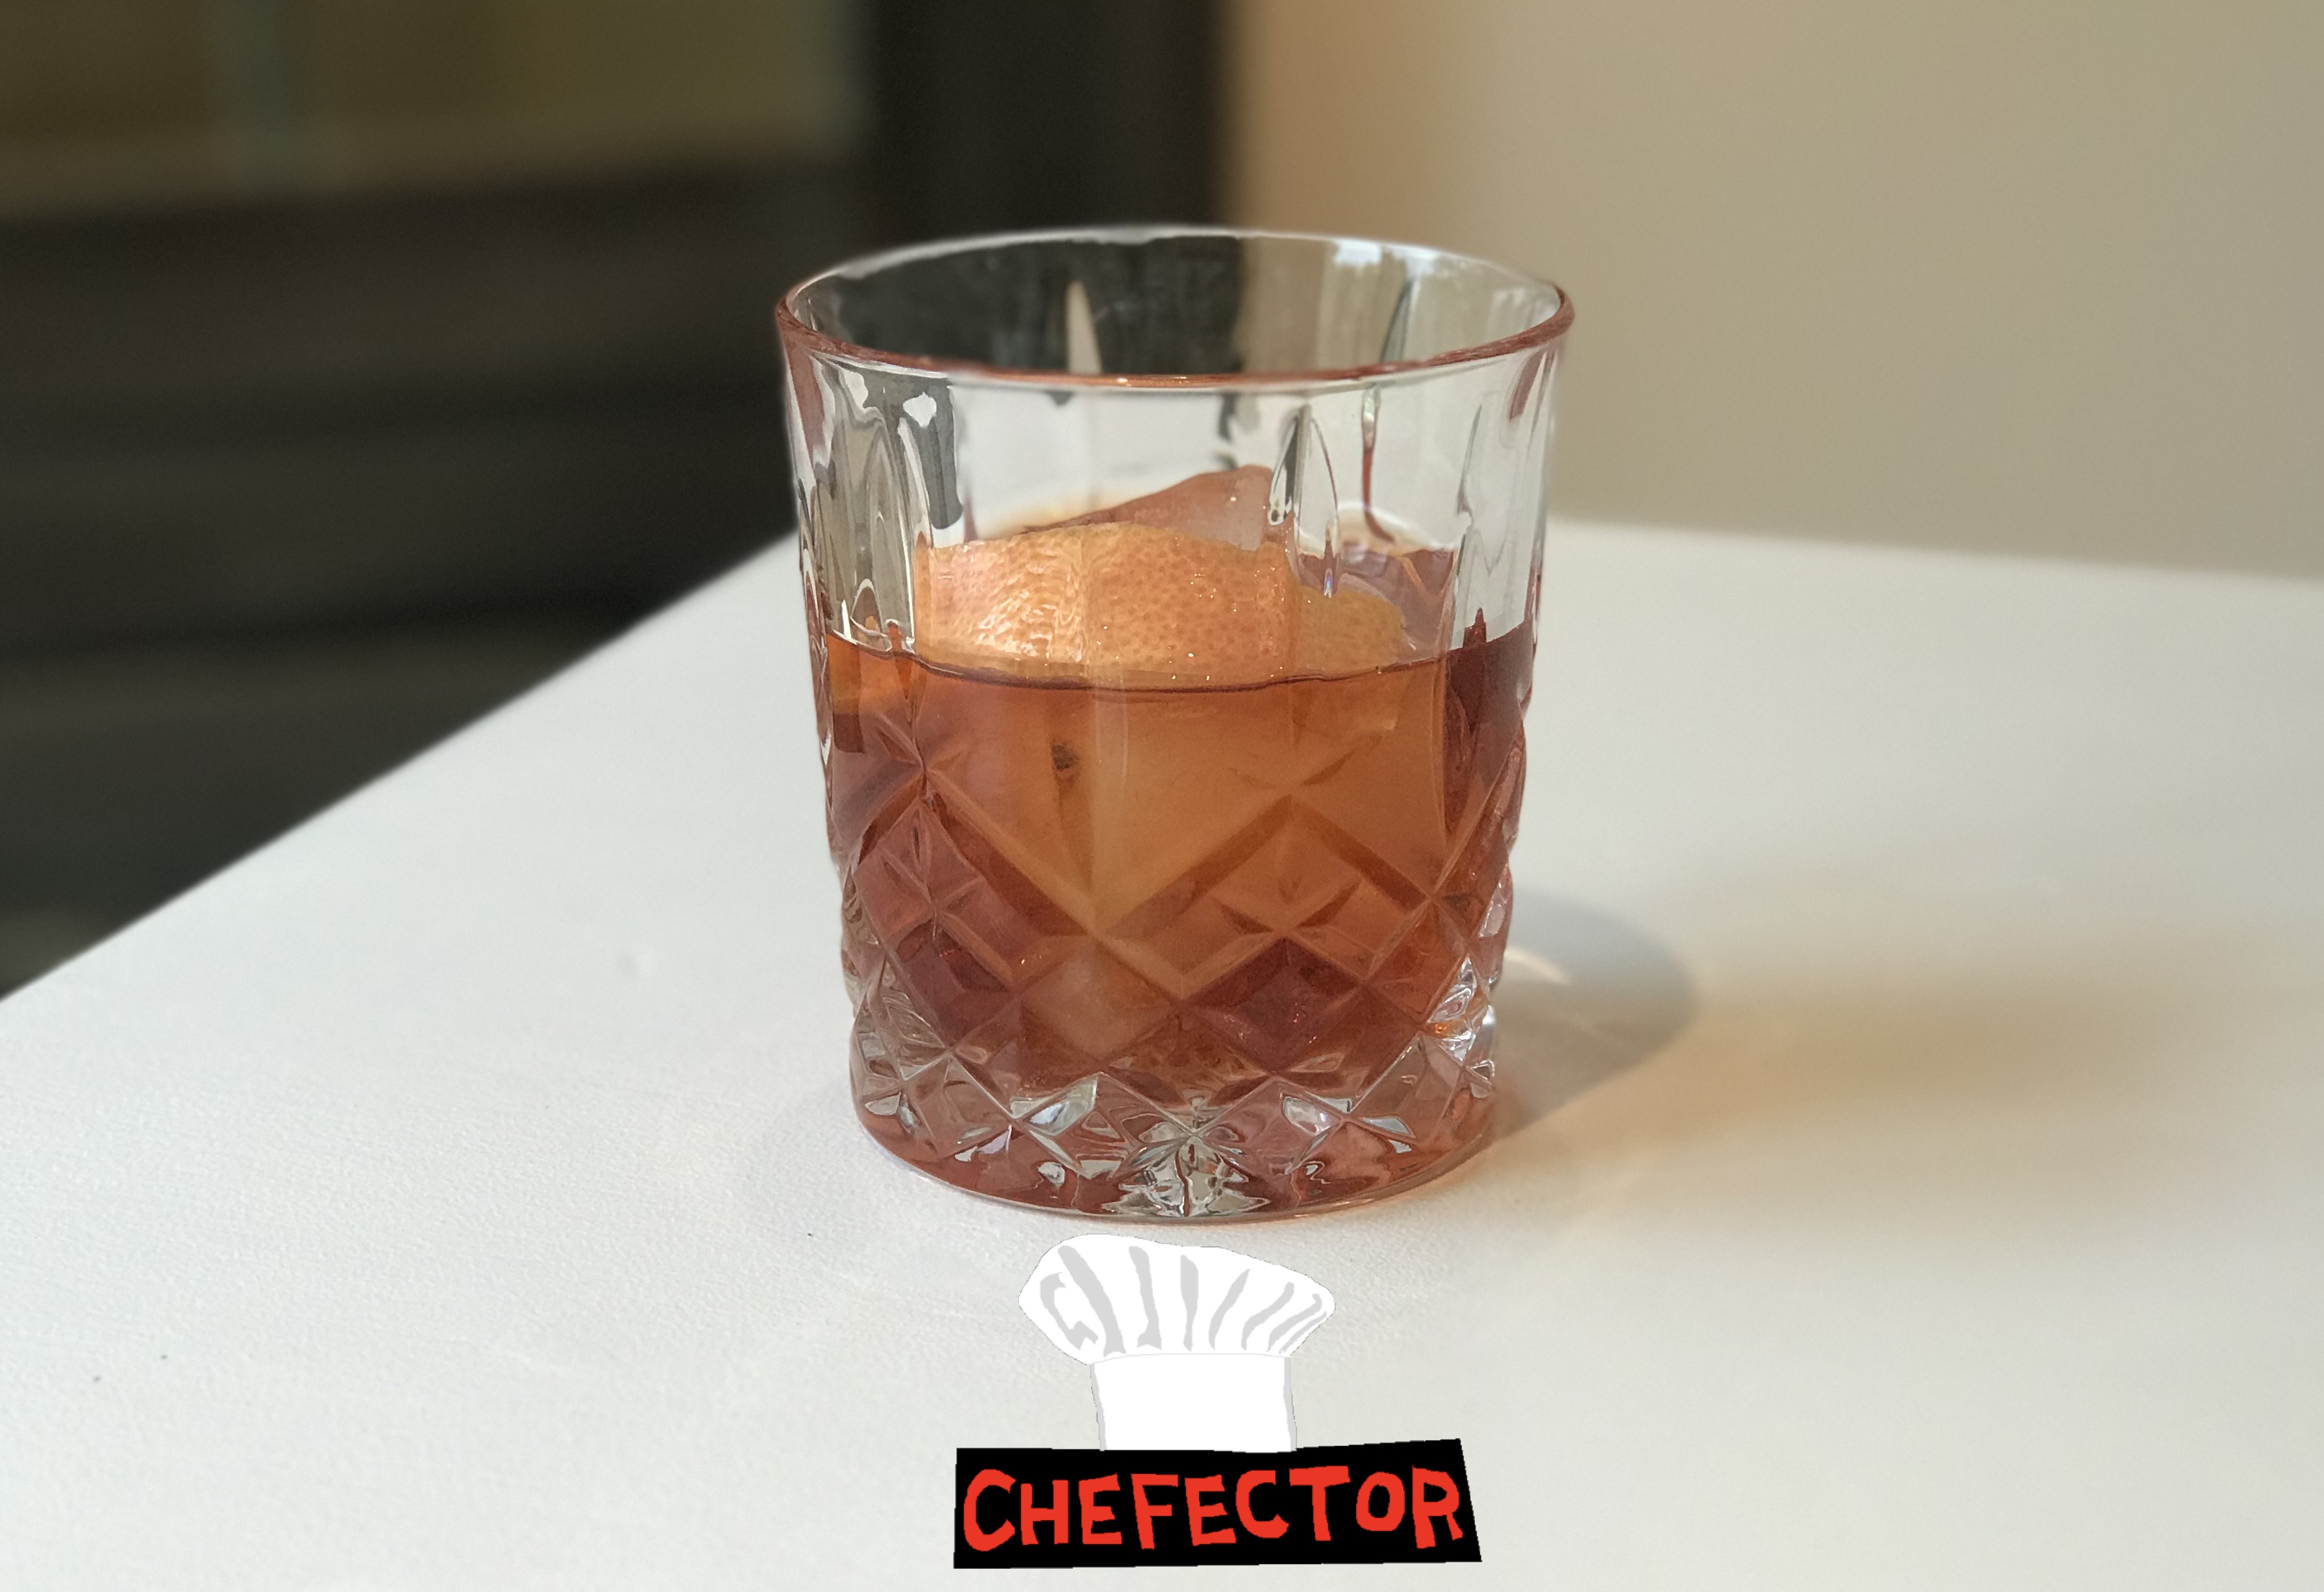 A cocktail that I made.